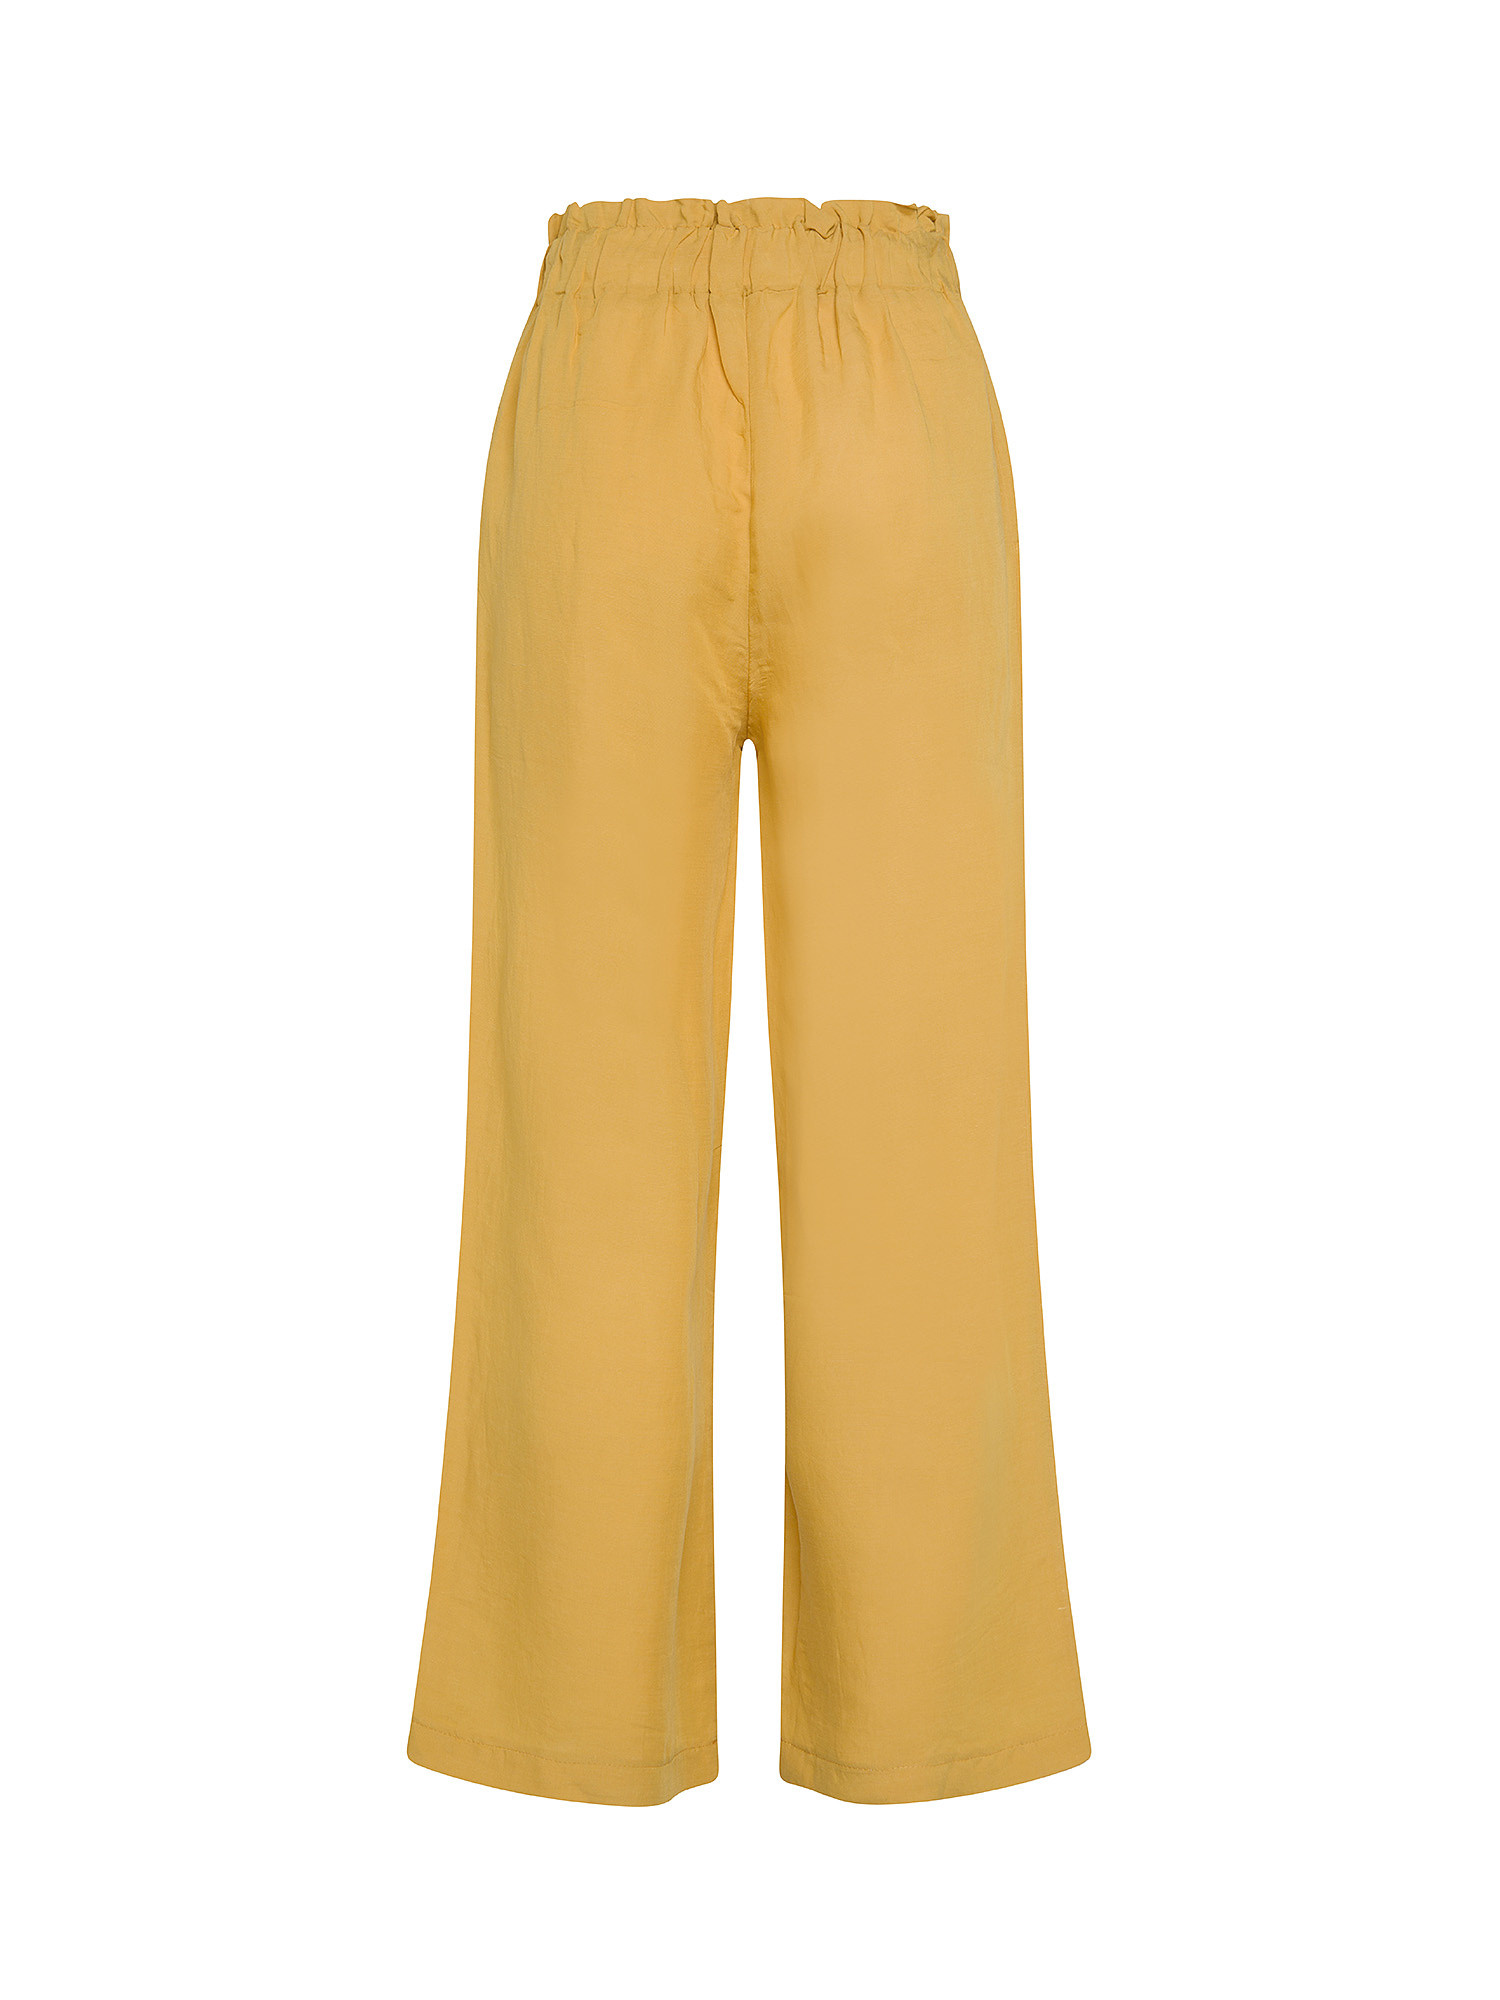 Solid color linen and viscose trousers, Ocra Yellow, large image number 1